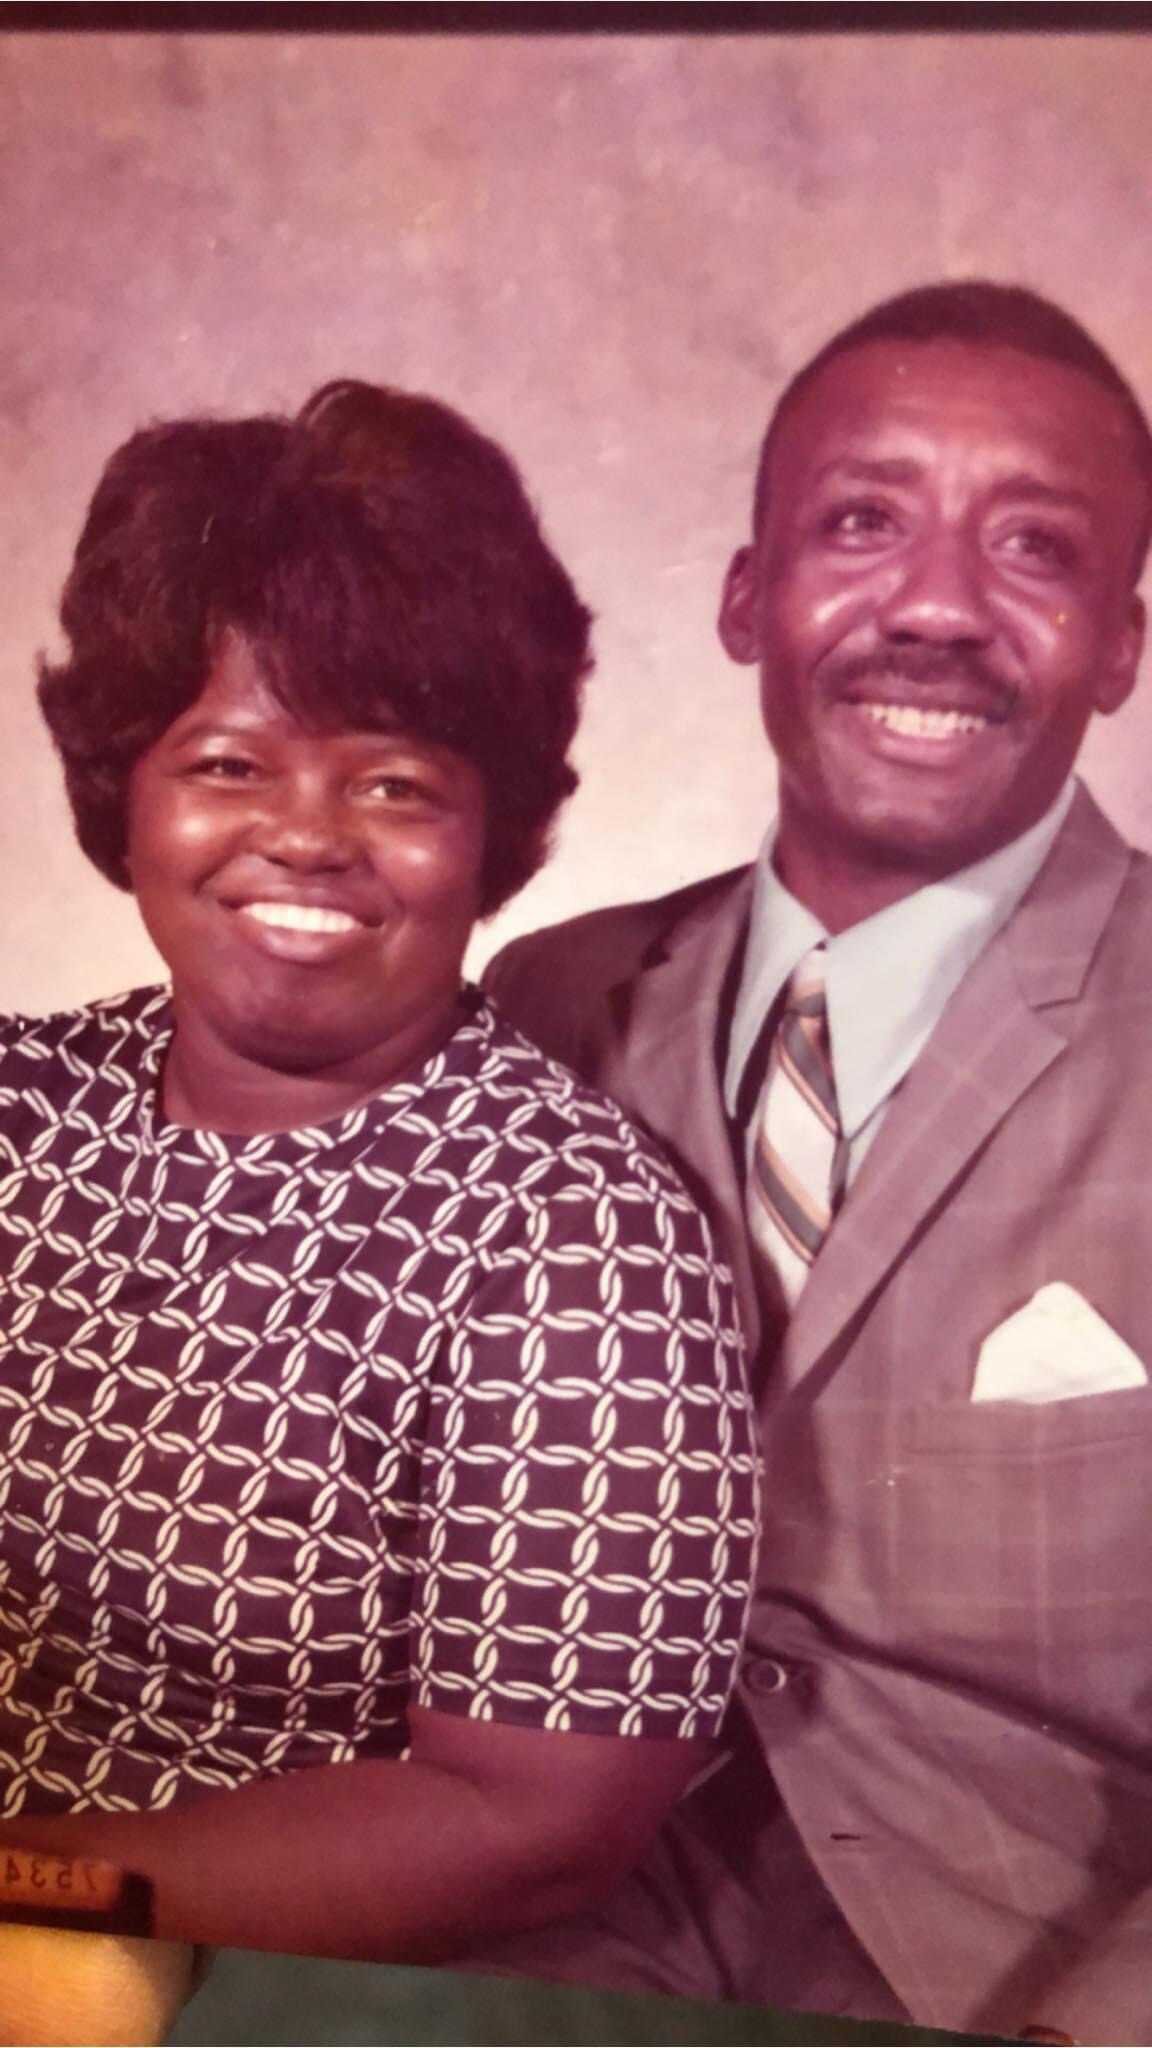 Archette’s parents, Nell and Eugene Holmes.